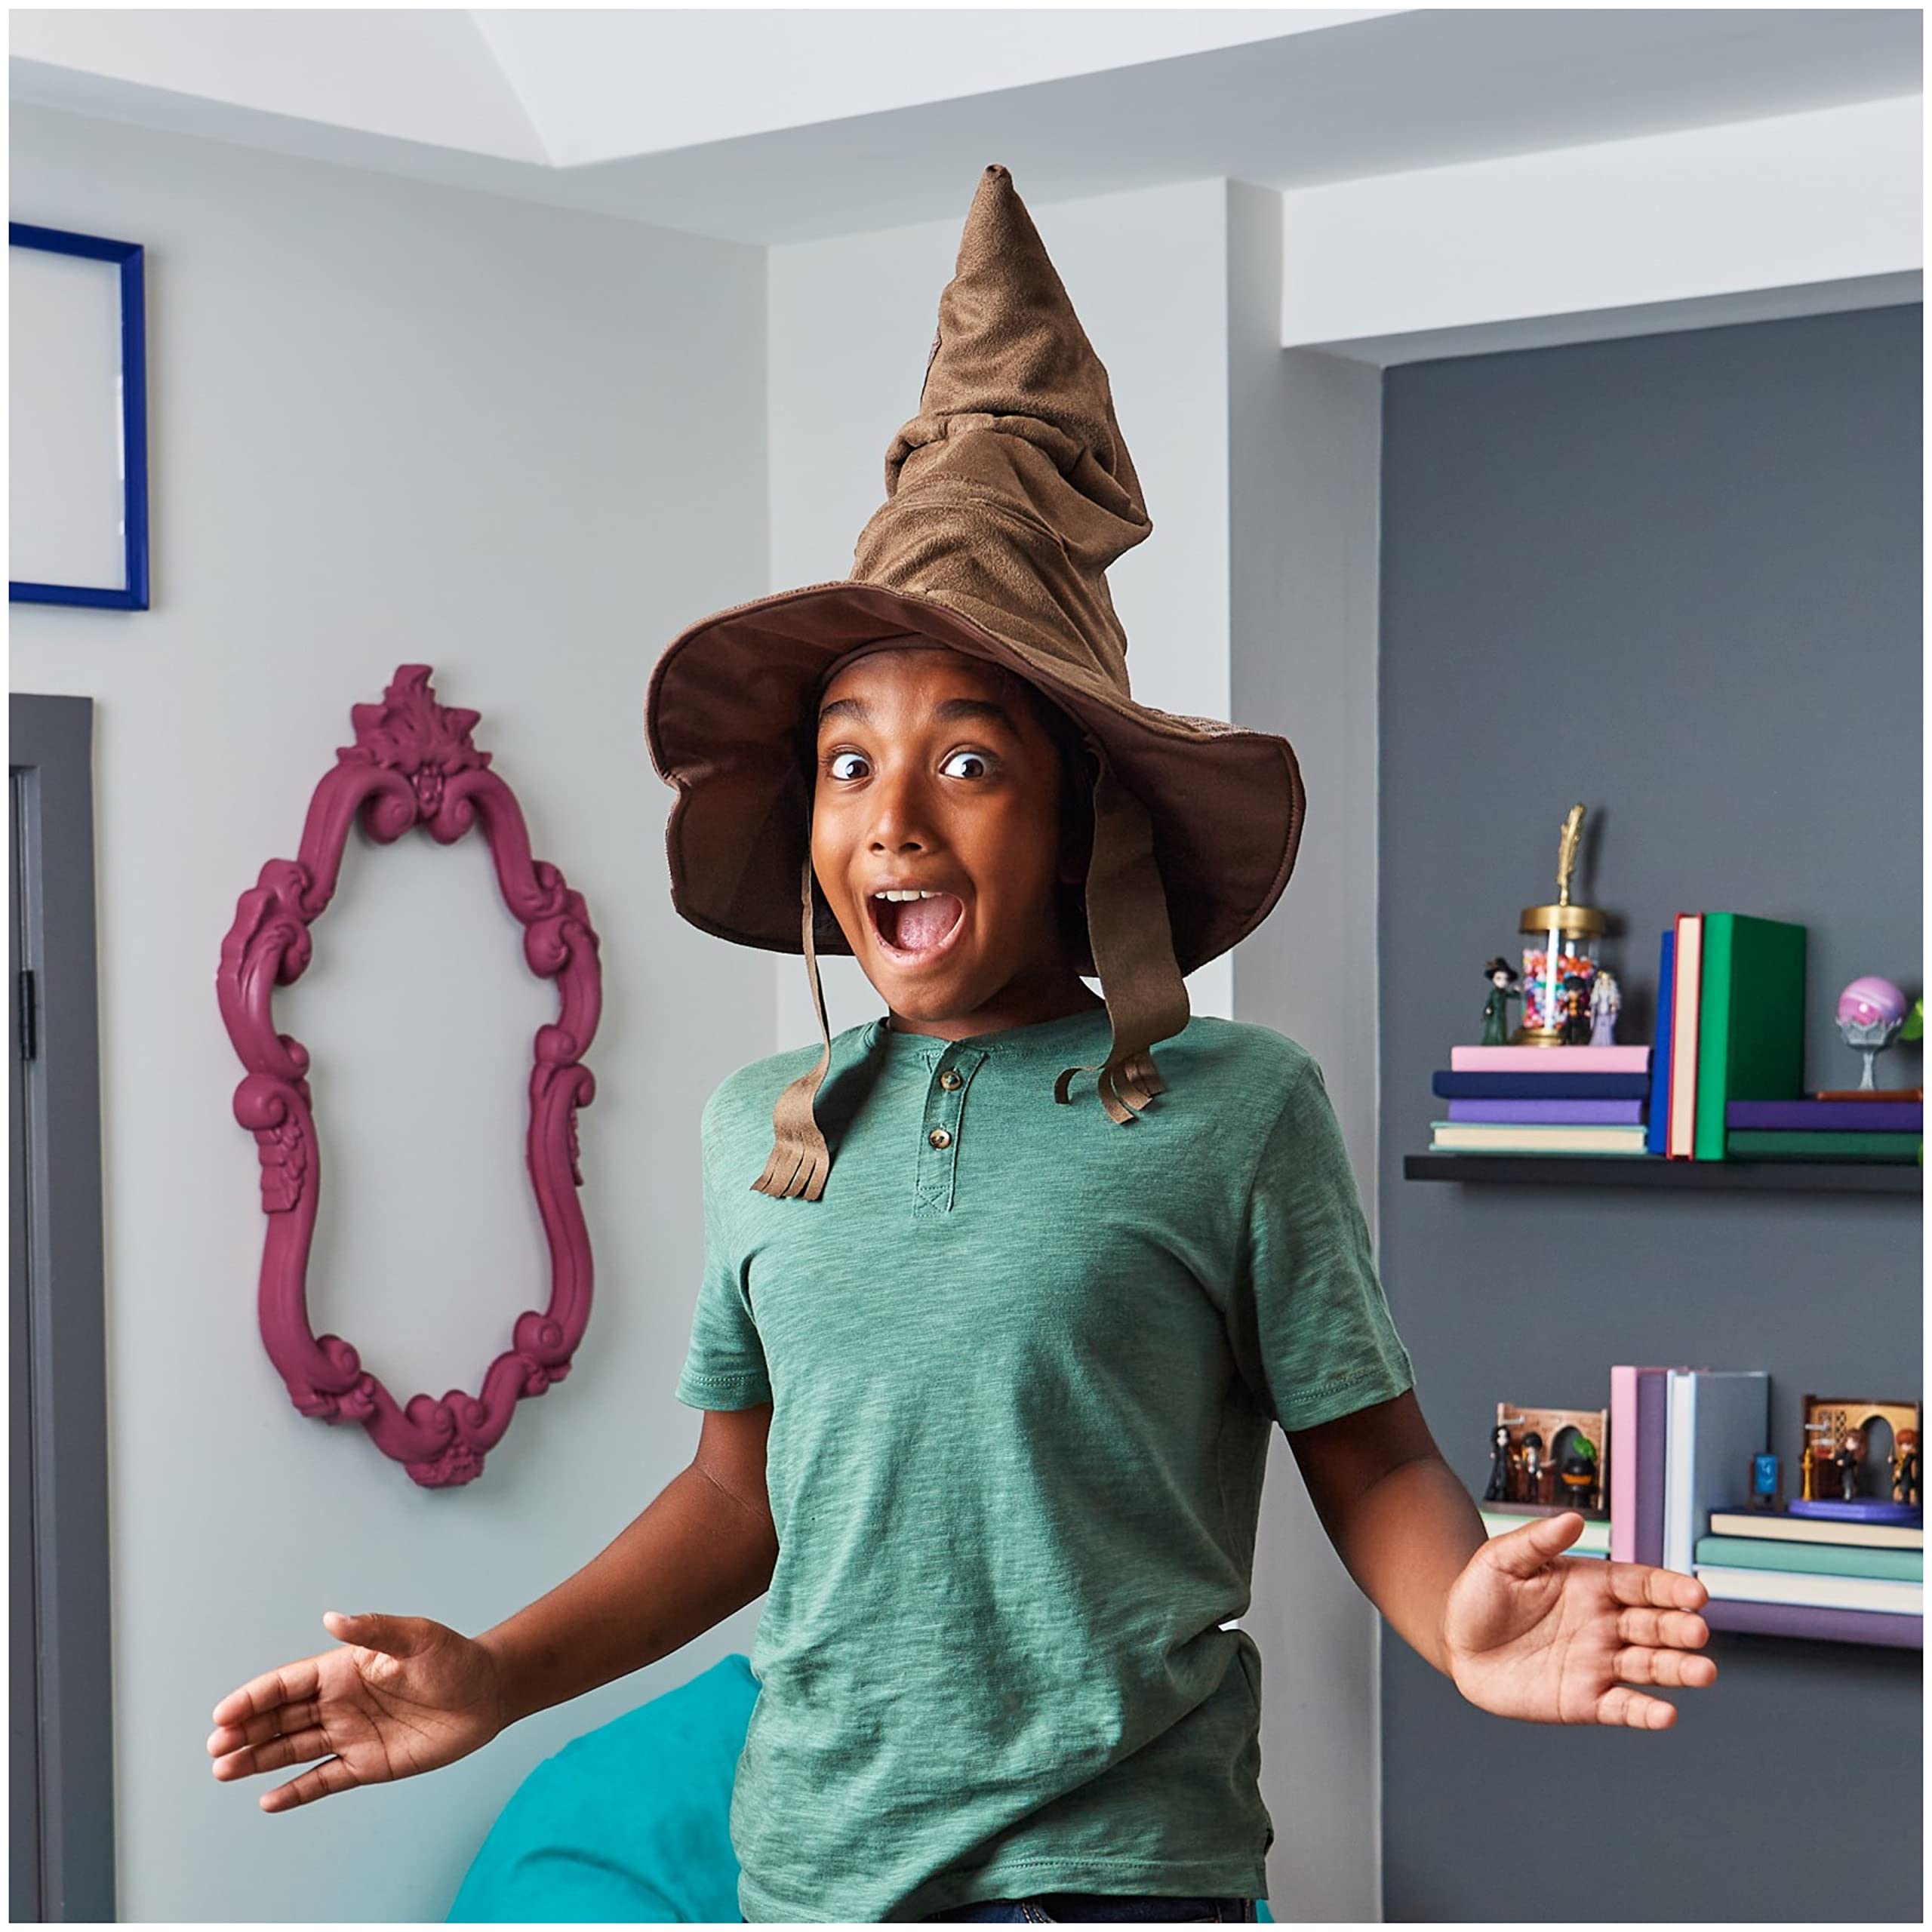 Wizarding World Harry Potter, Talking Sorting Hat with 15 Phrases for Pretend Play, Kids Toys for Ages 5 and Up